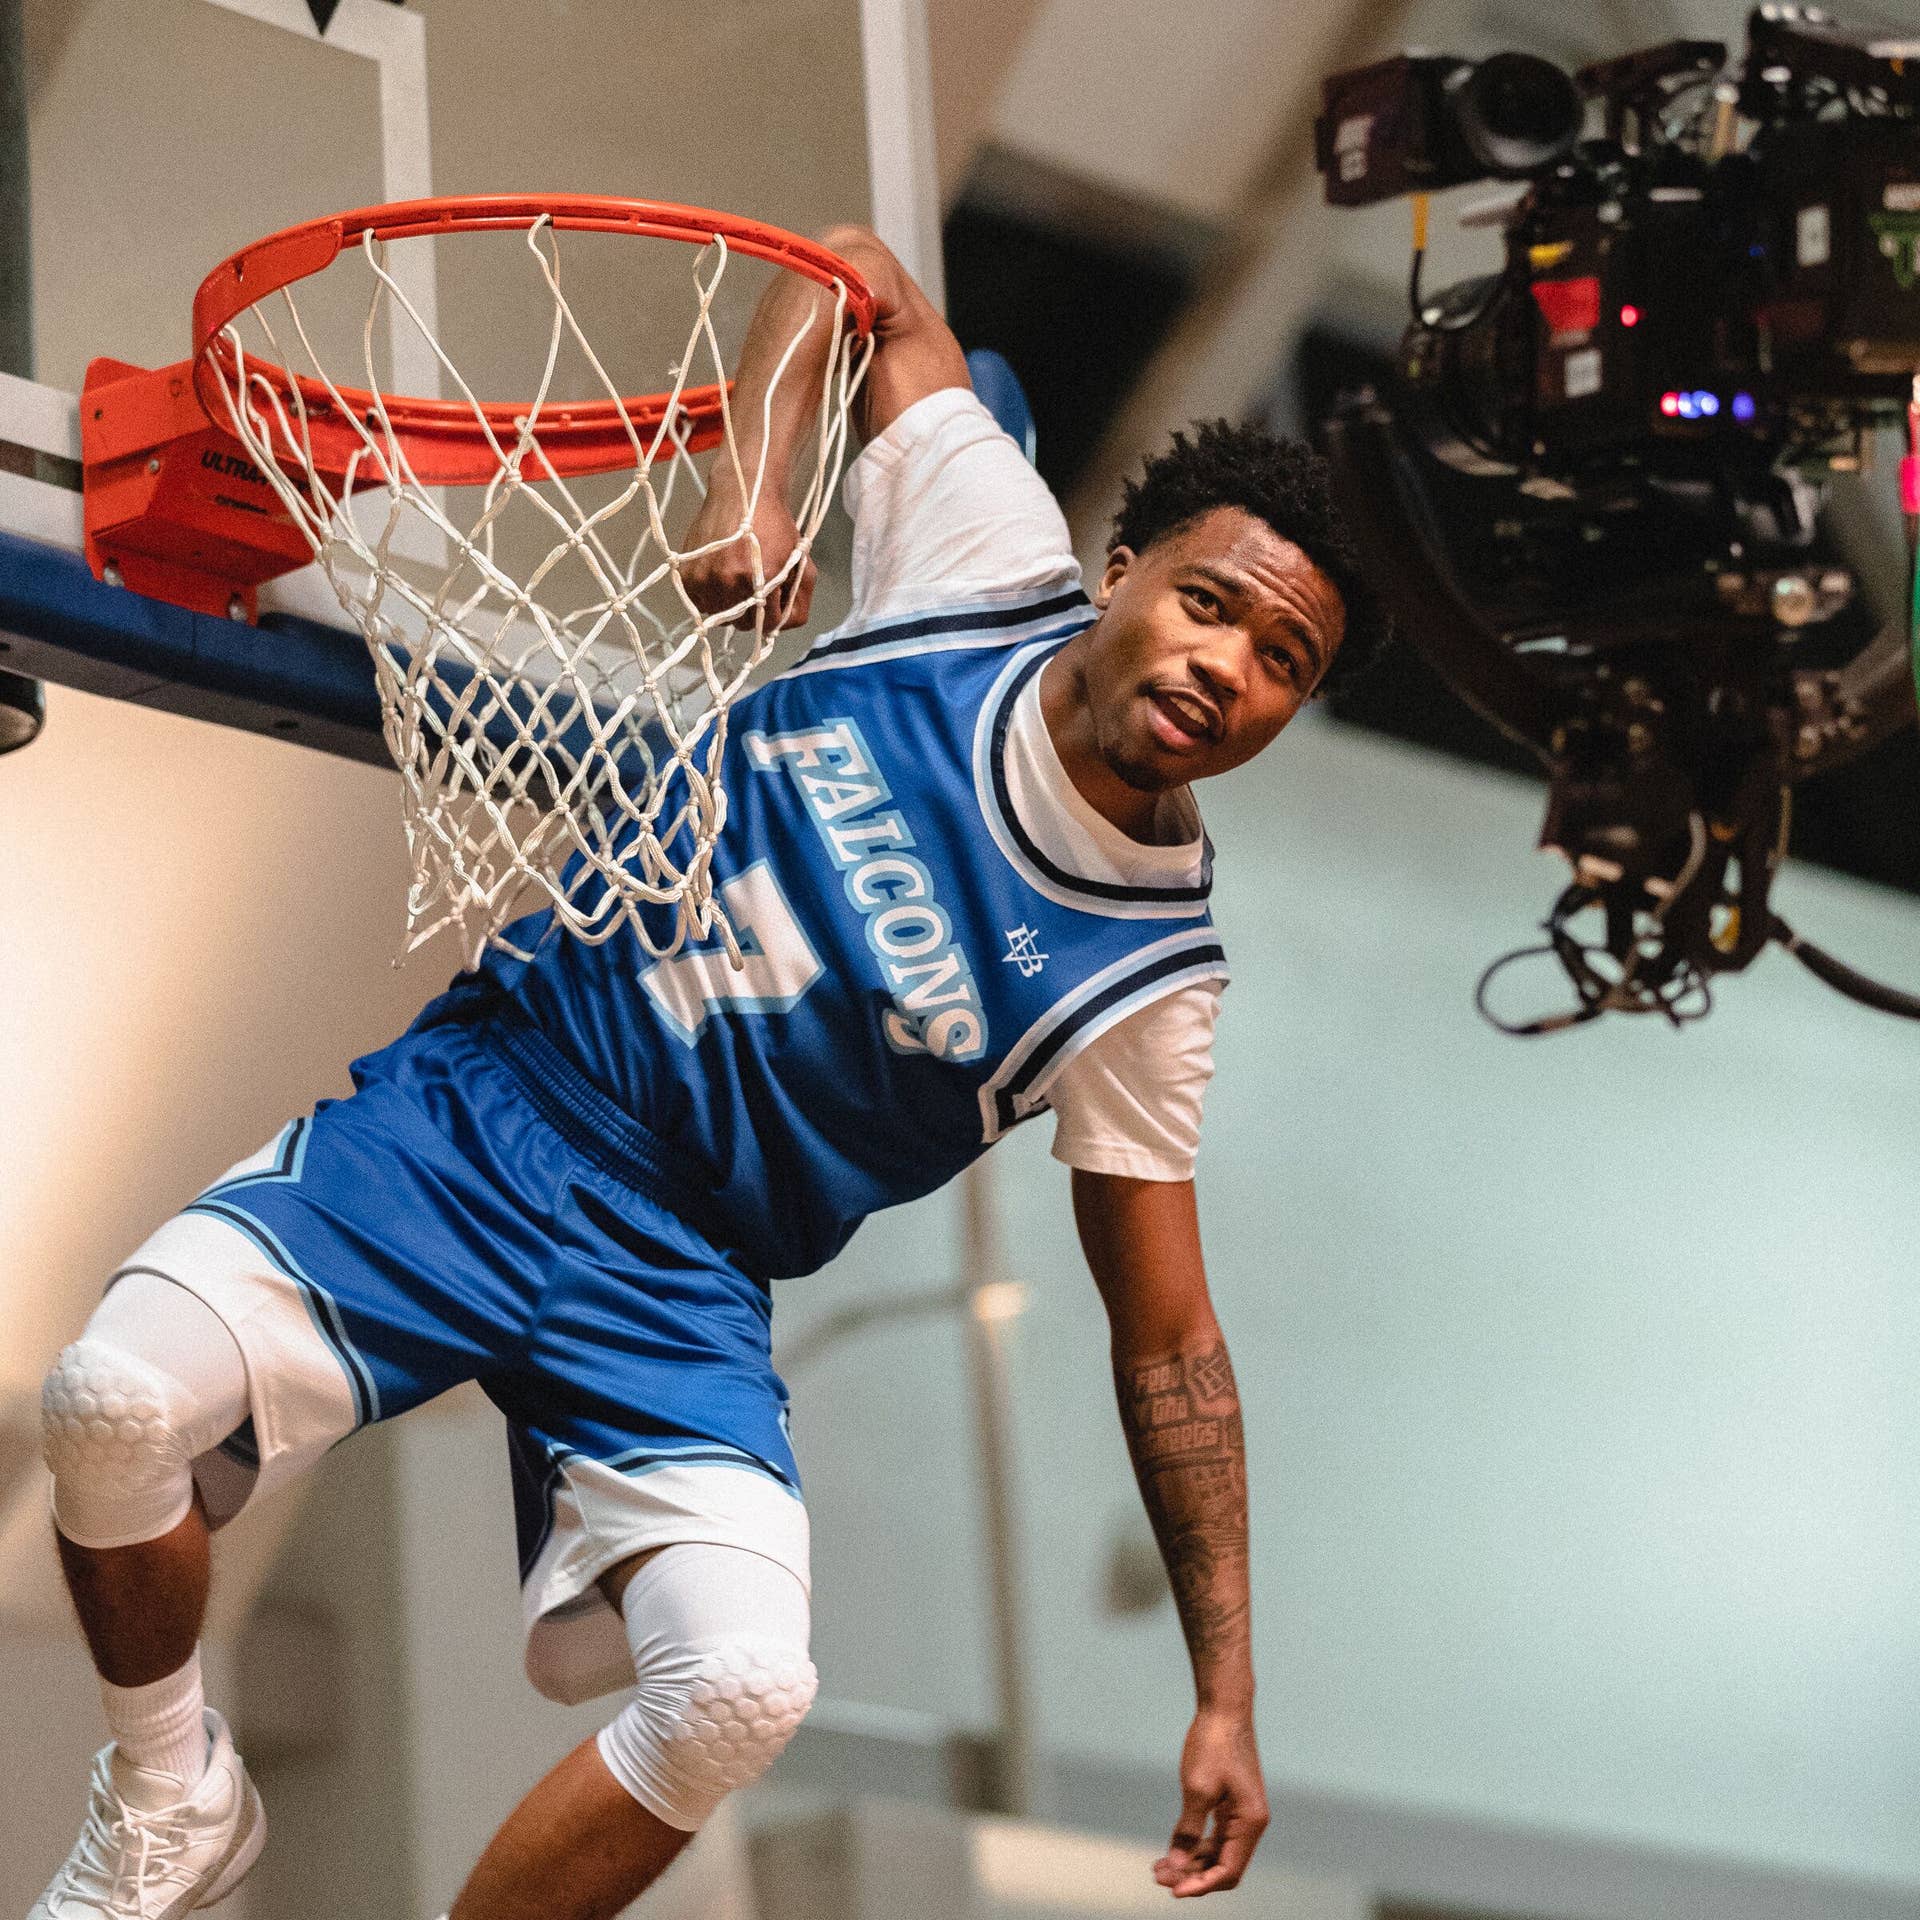 Behind the Scenes of Roddy Ricch's "The Box" Music Video